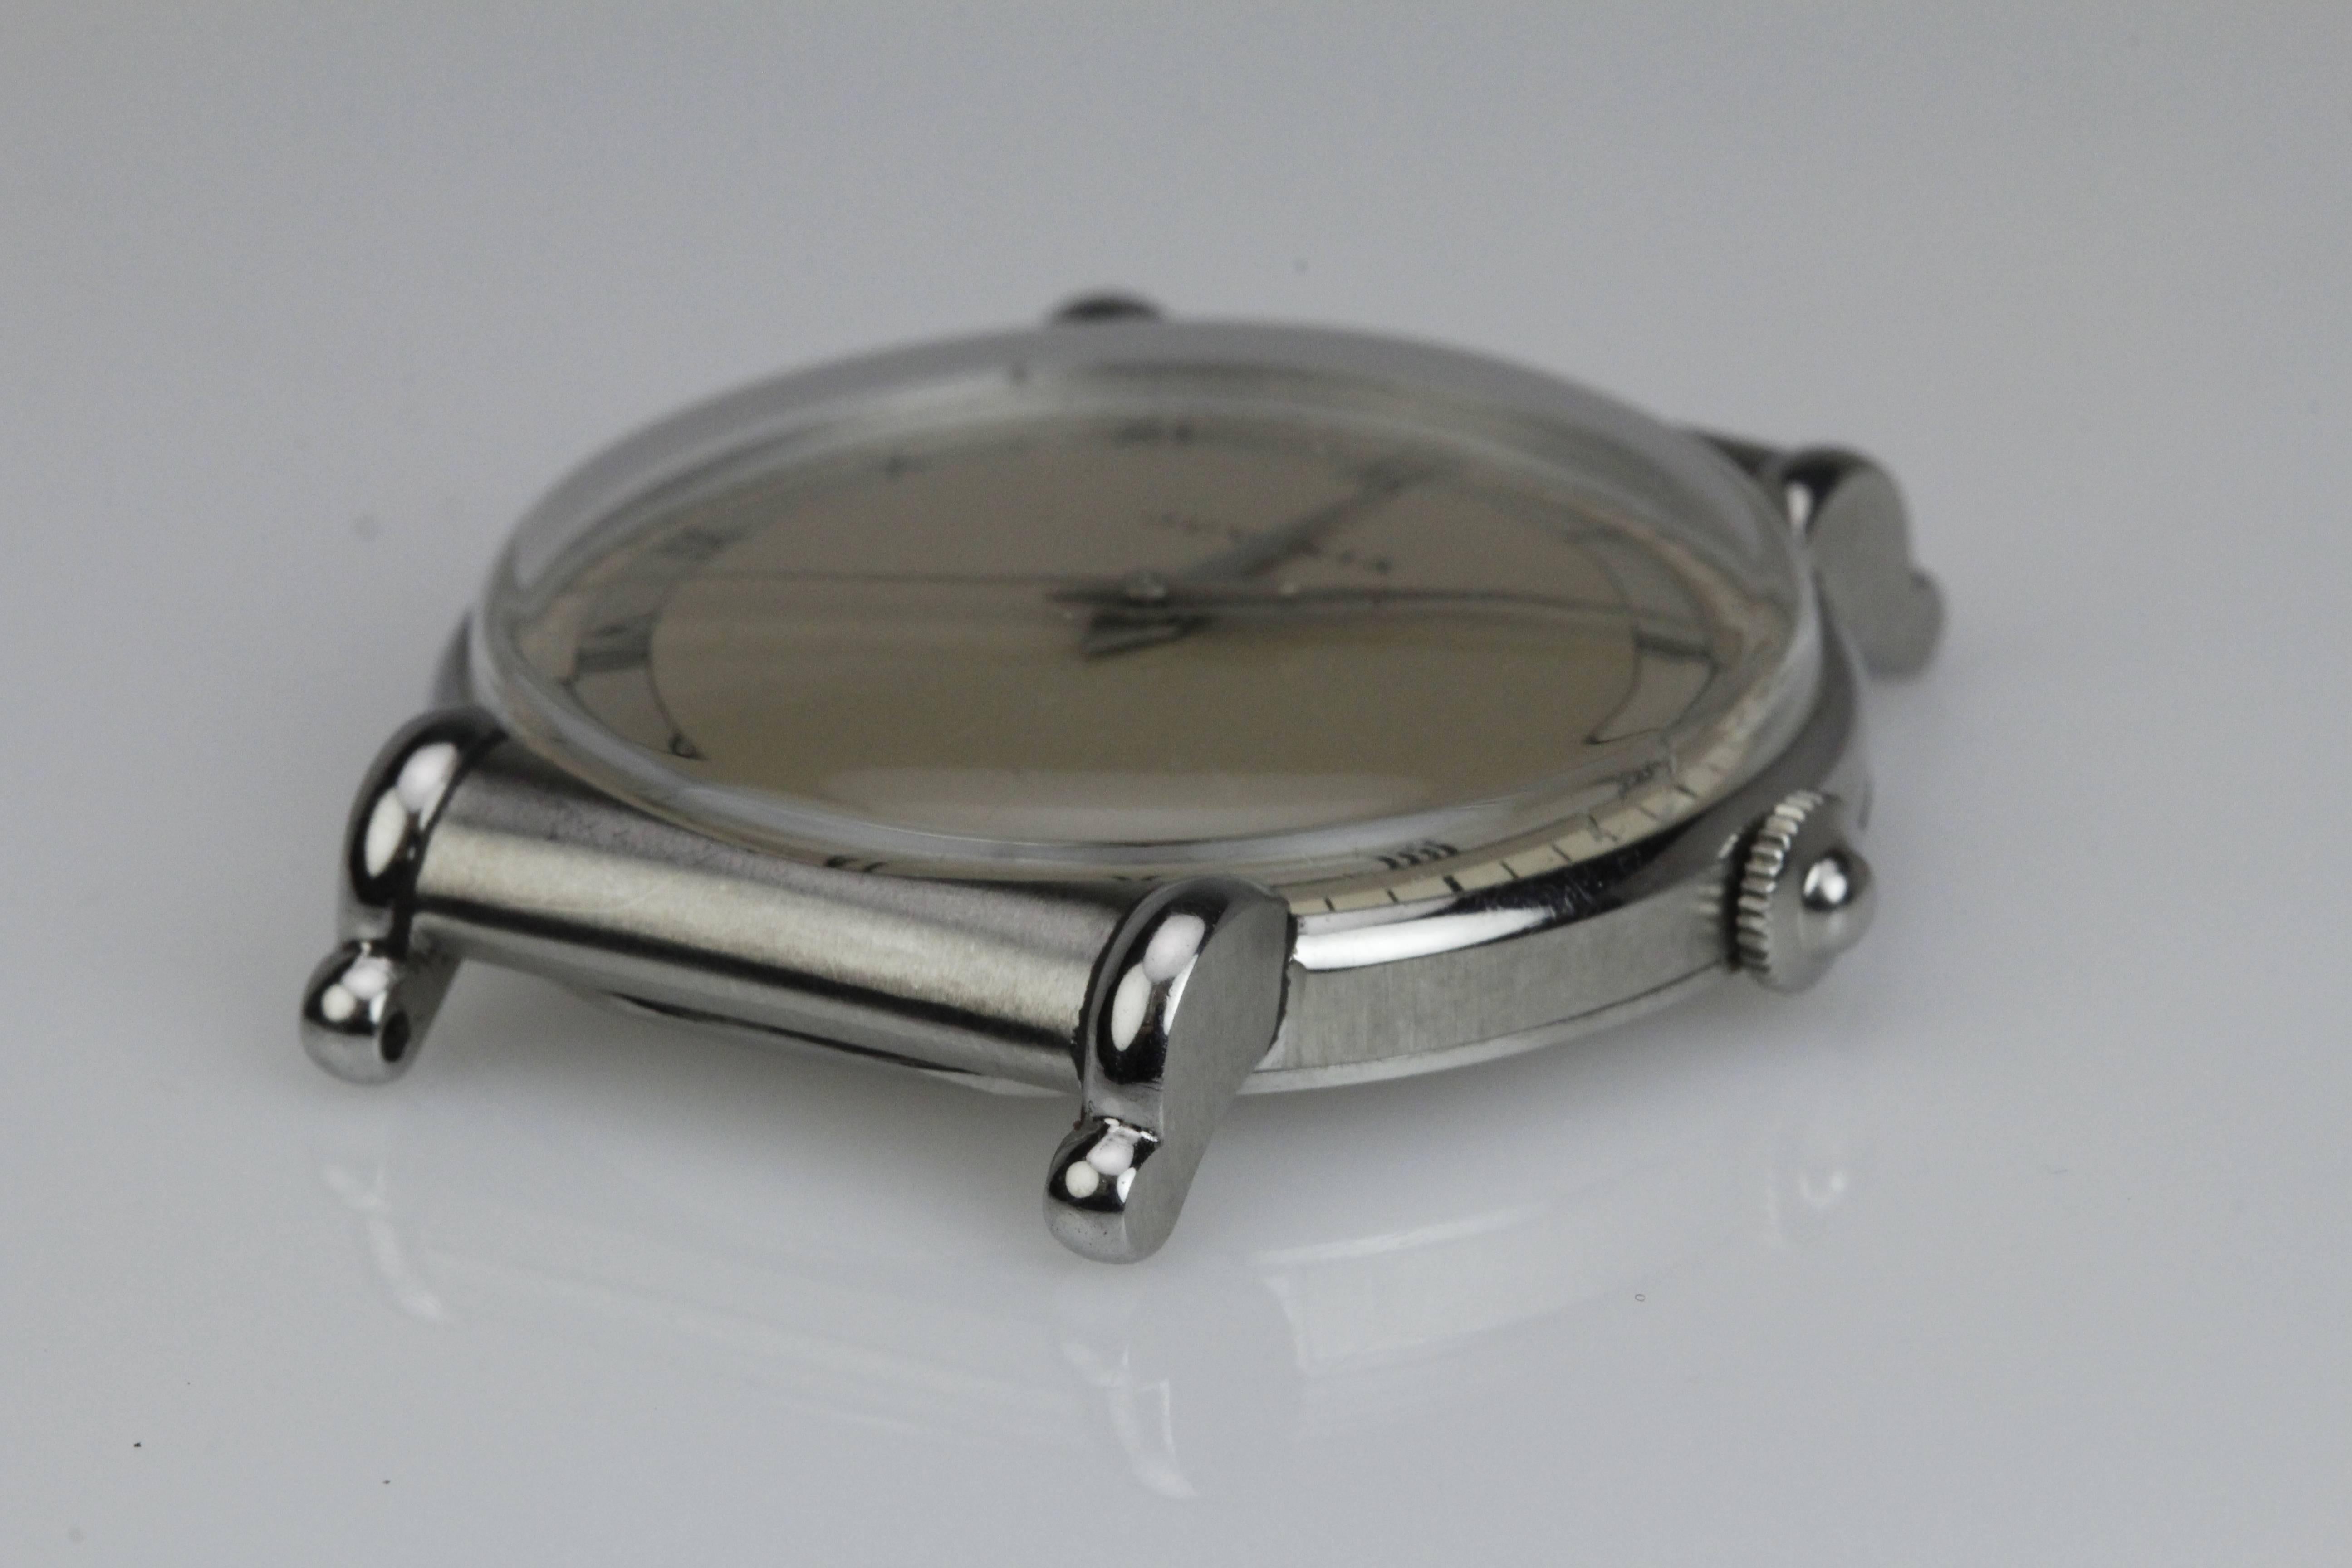 This is an elegant Calatrava style wristwatch by Juvenia from the 1940's. The 33mm stainless steel case has  partially hooded scroll lugs. This is a manual wind movement